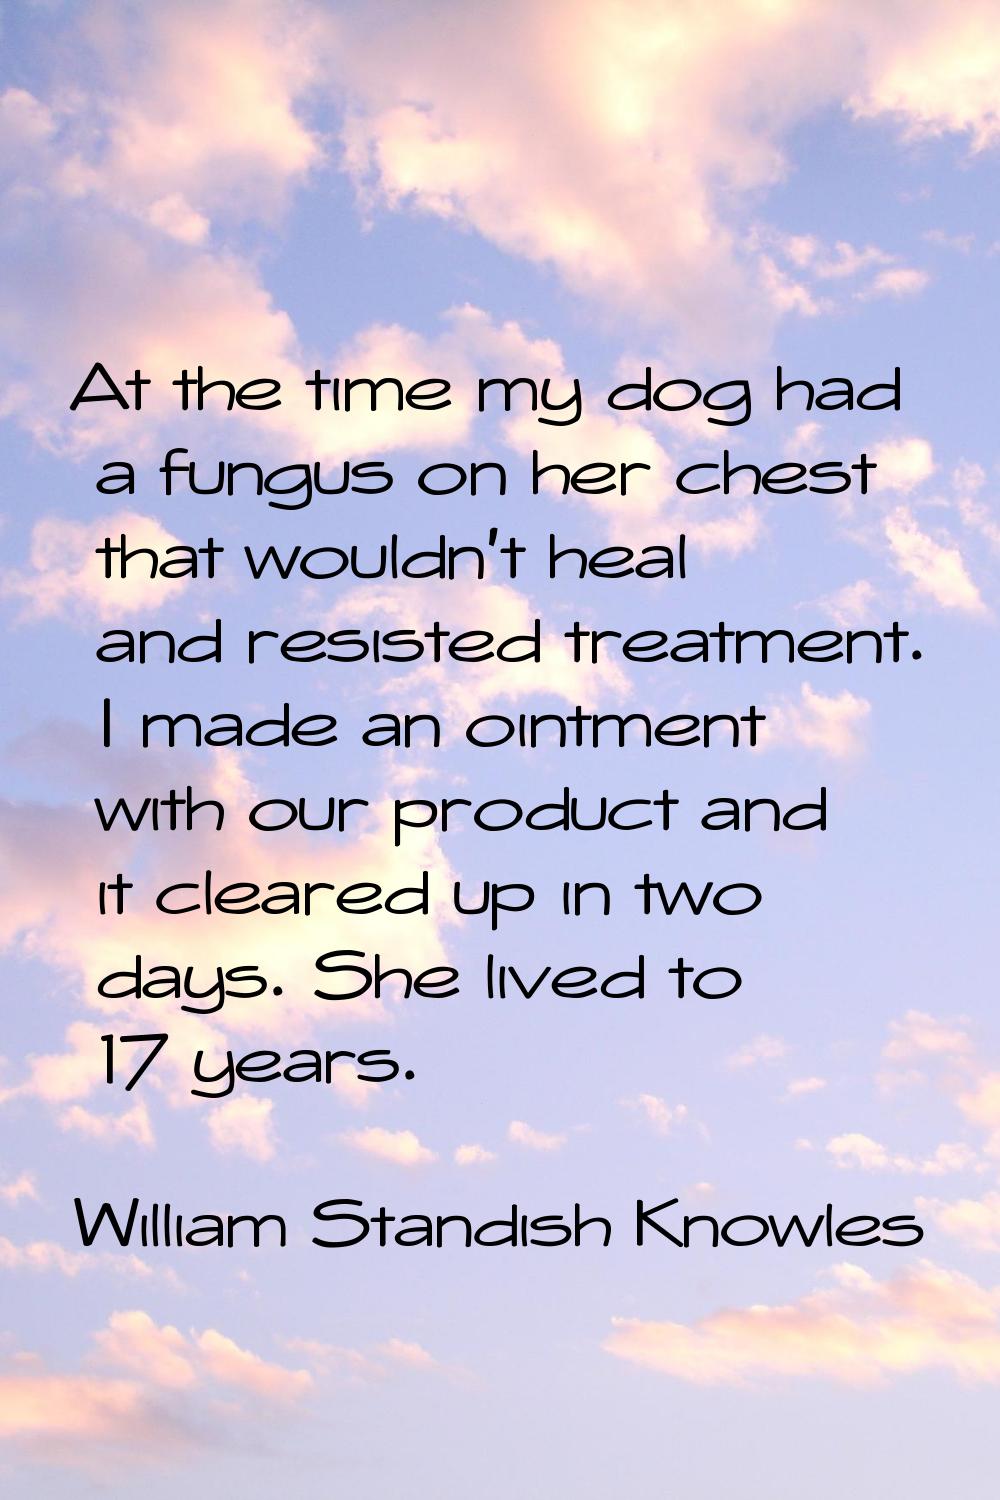 At the time my dog had a fungus on her chest that wouldn't heal and resisted treatment. I made an o